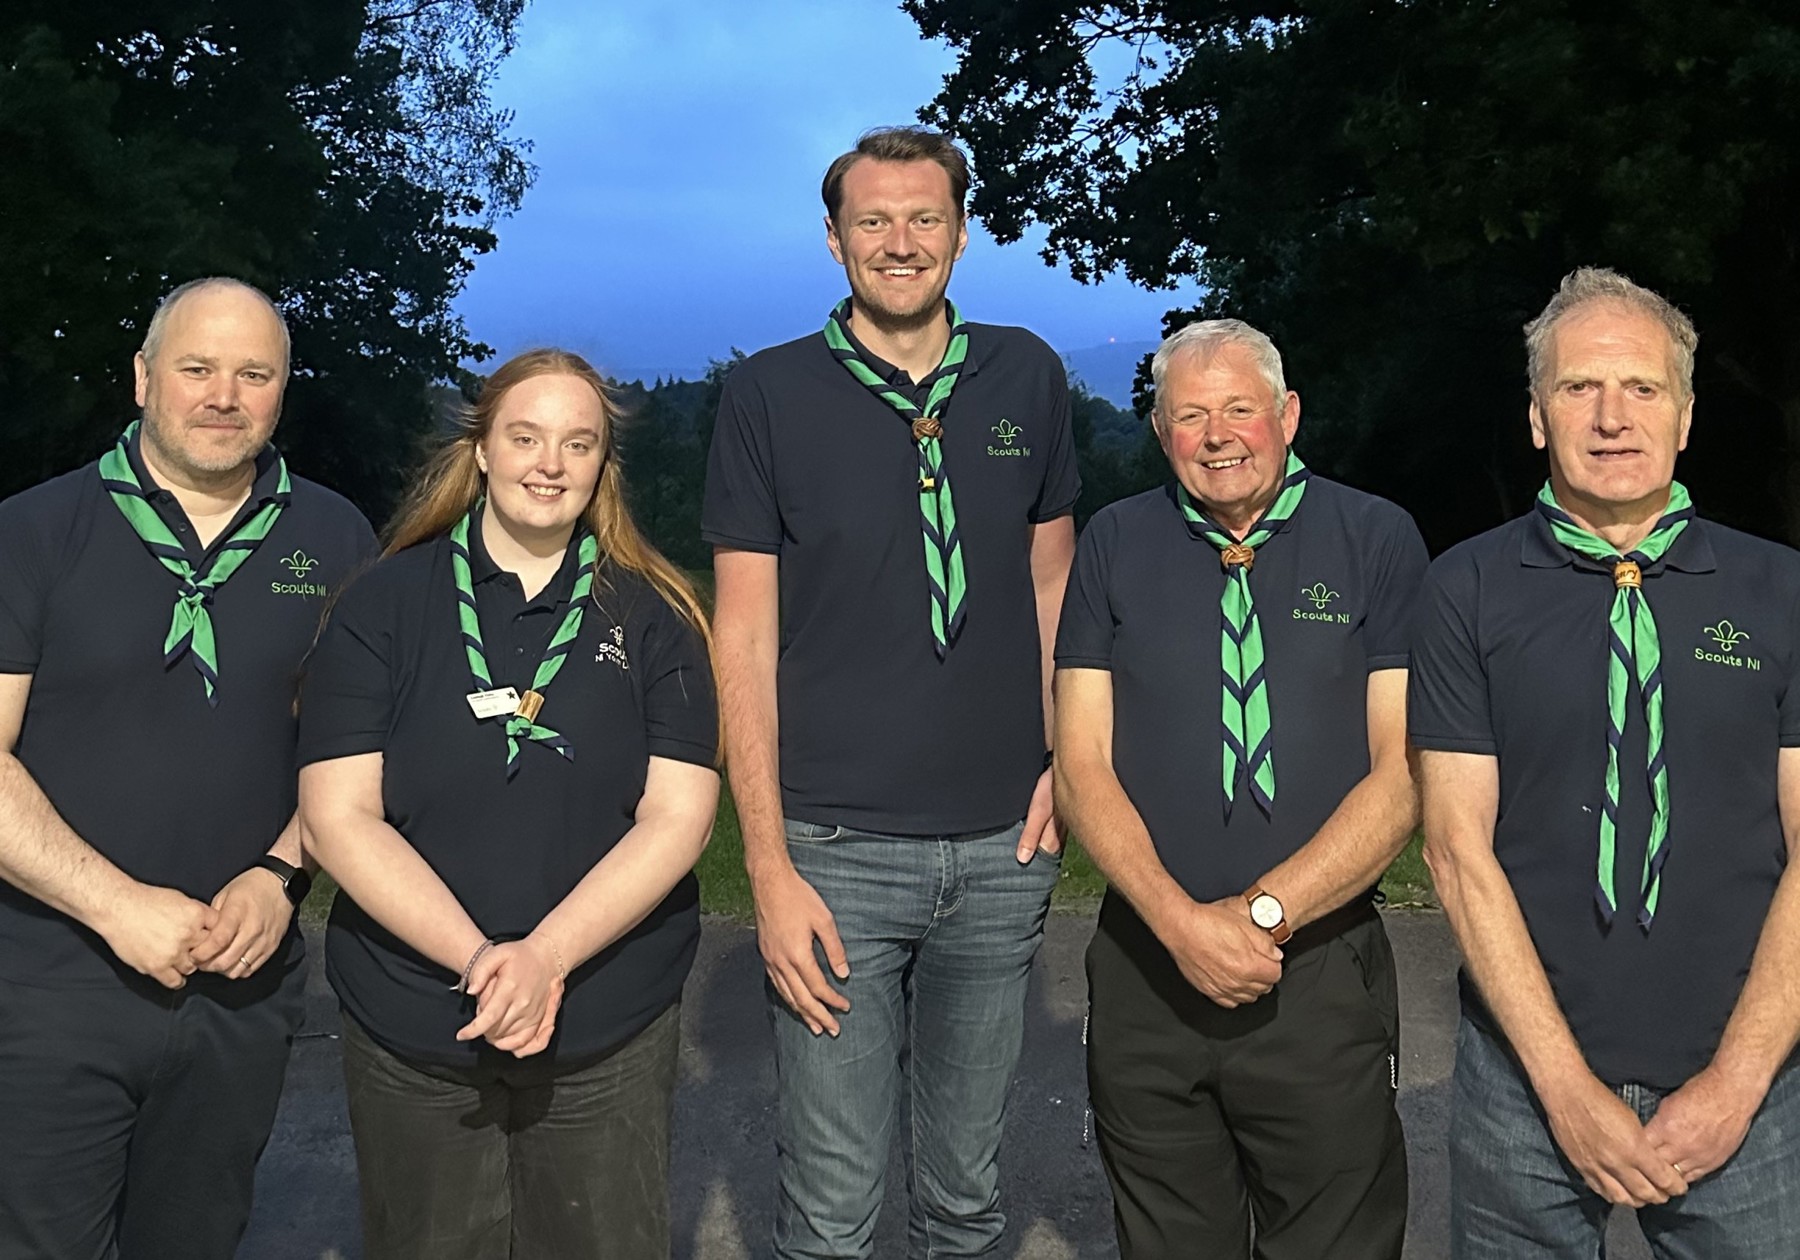 Five members of the Scout NI Team standing outside together with scout scarfs round their necks